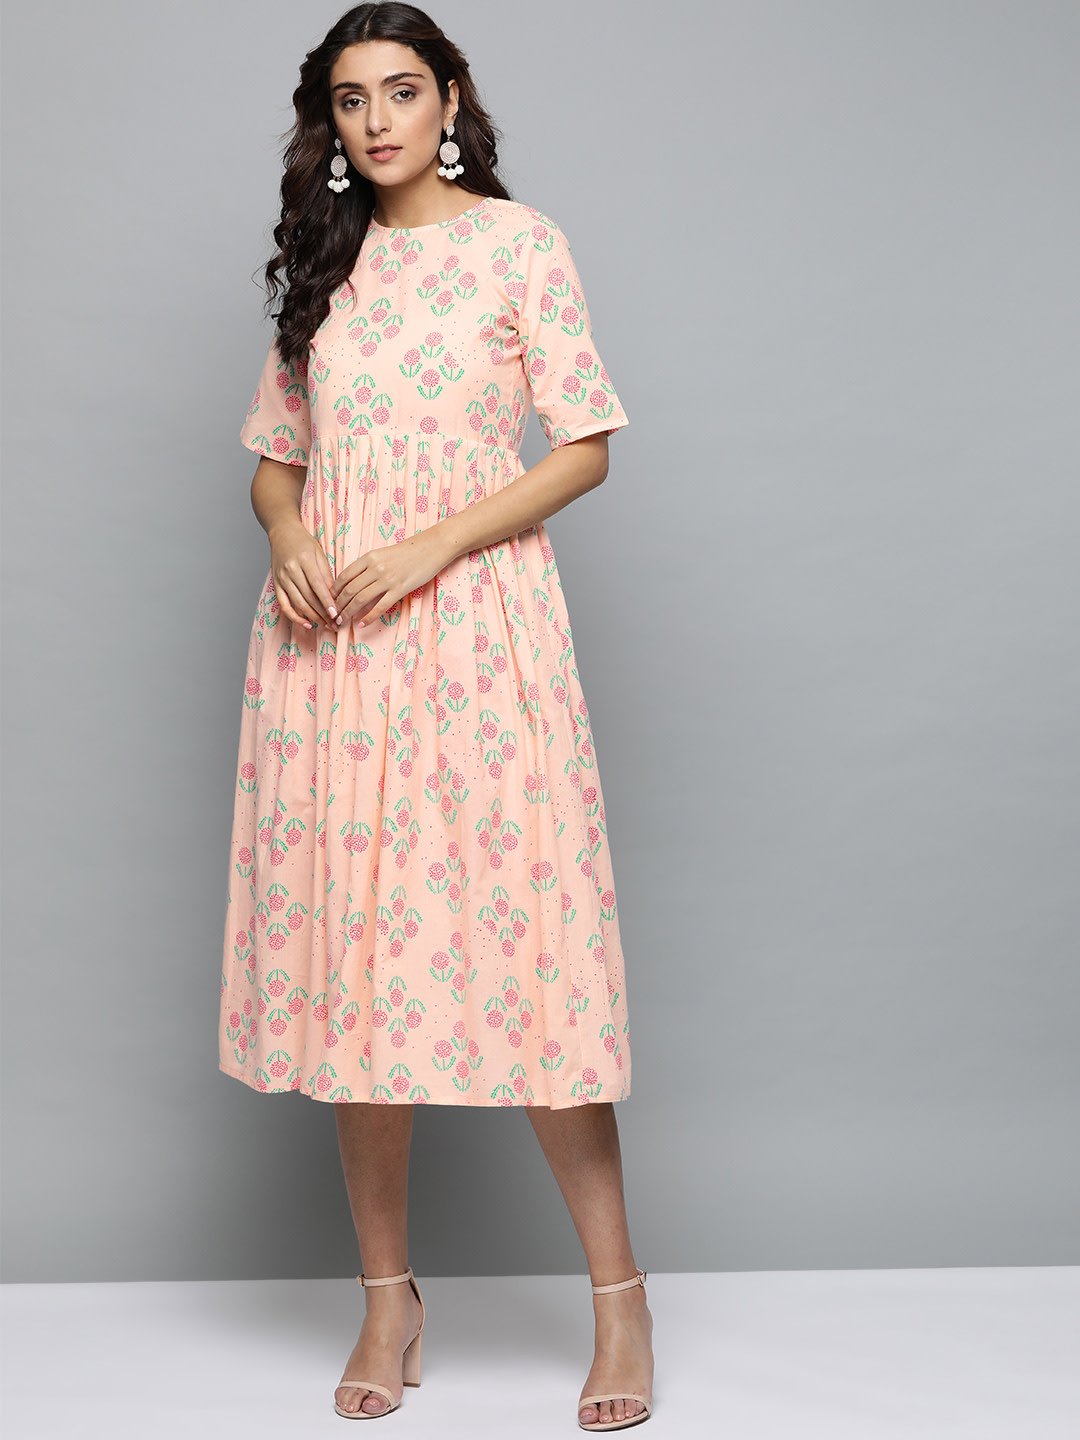 Women's Peach Floral Printed Round Neck A-Line Dress - Nayo Clothing